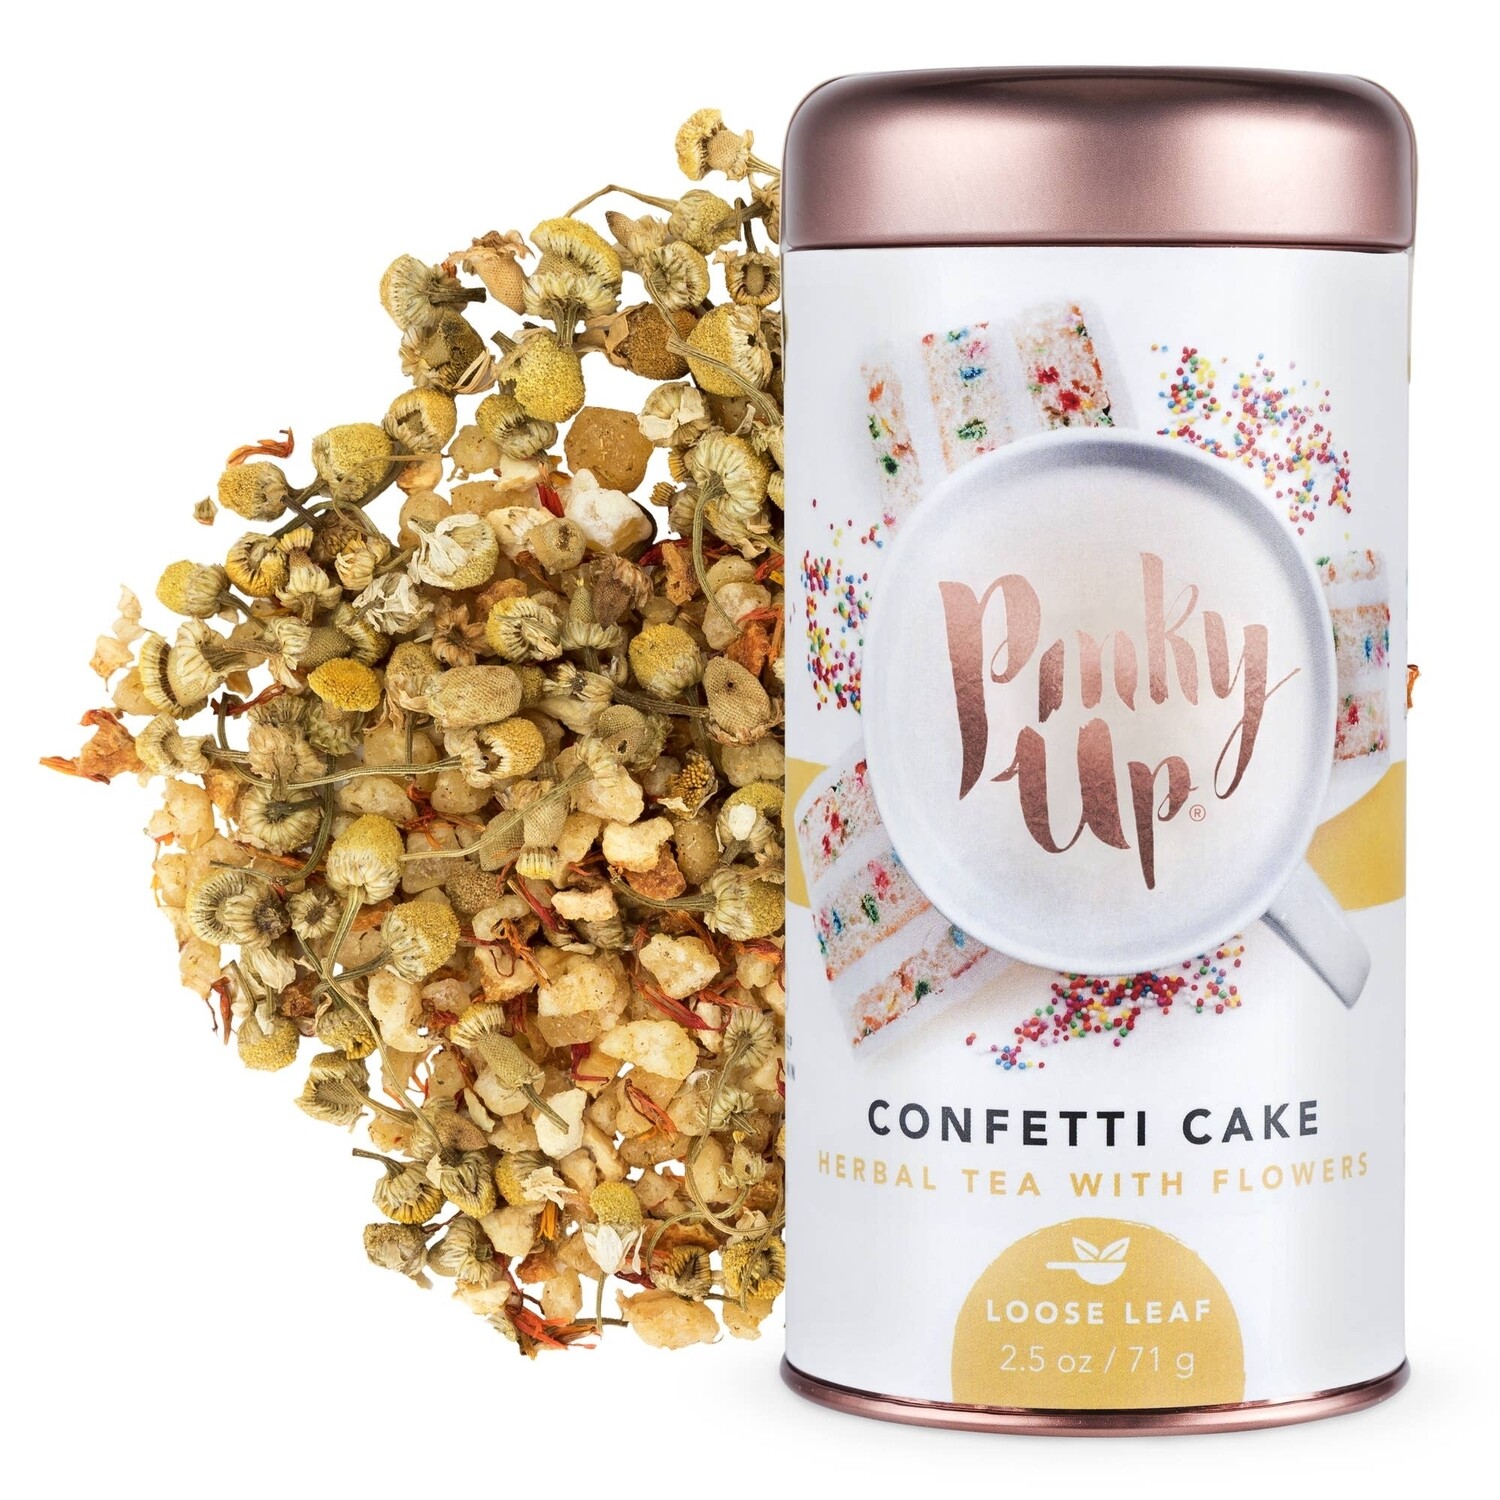 Pinky Up Confetti Cake Herbal Tea With Flowers